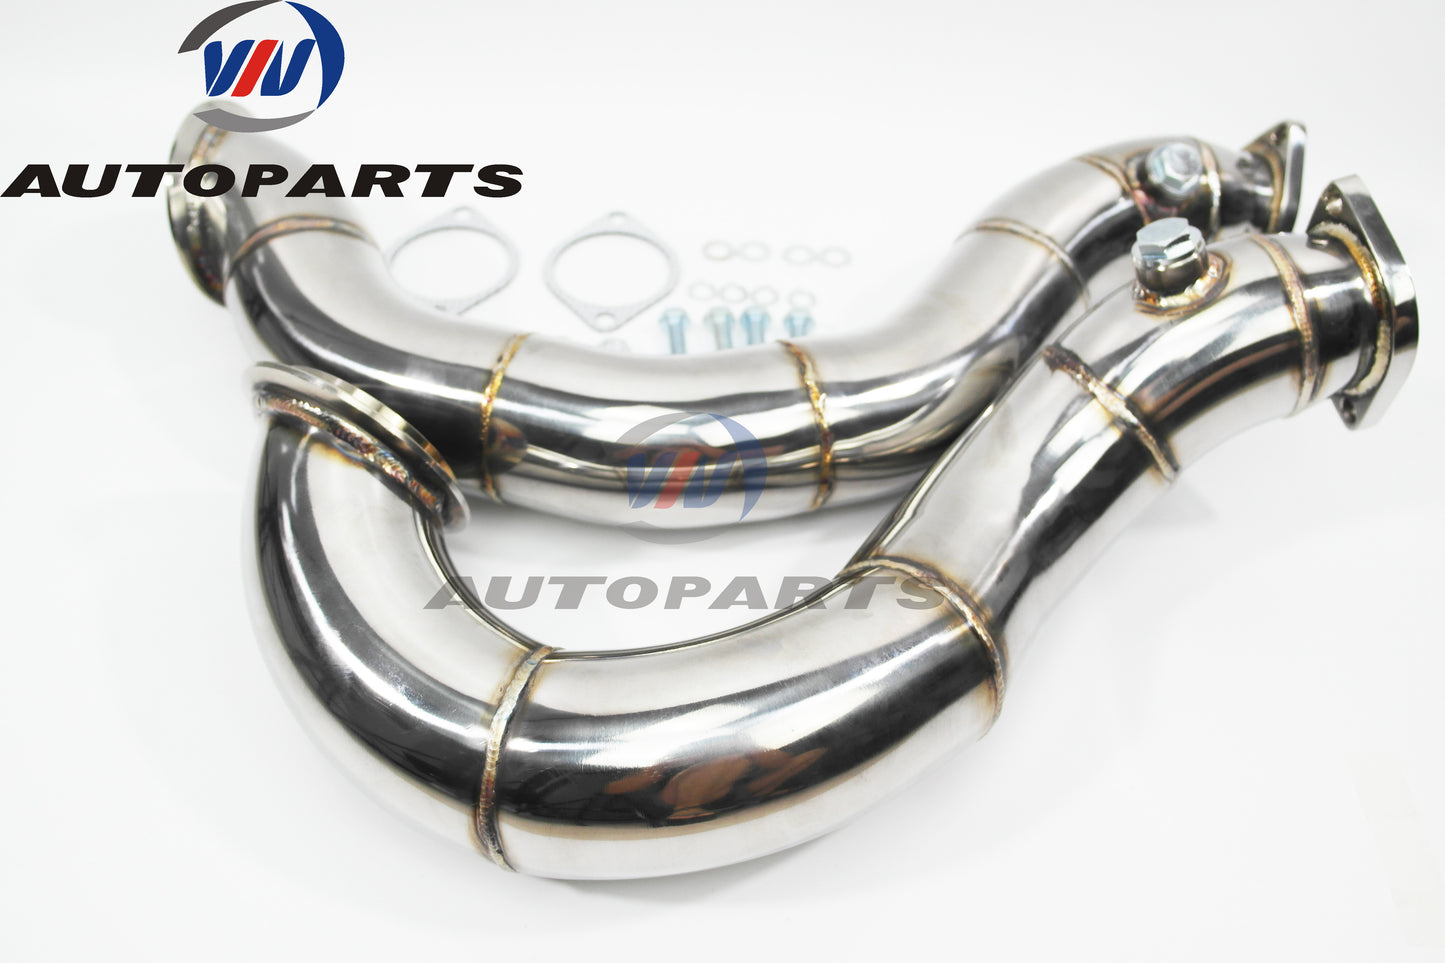 3" STAINLESS STEEL CATLESS DOWN PIPES for 2007-2012 BMW 135i 335i N54 E90 E91